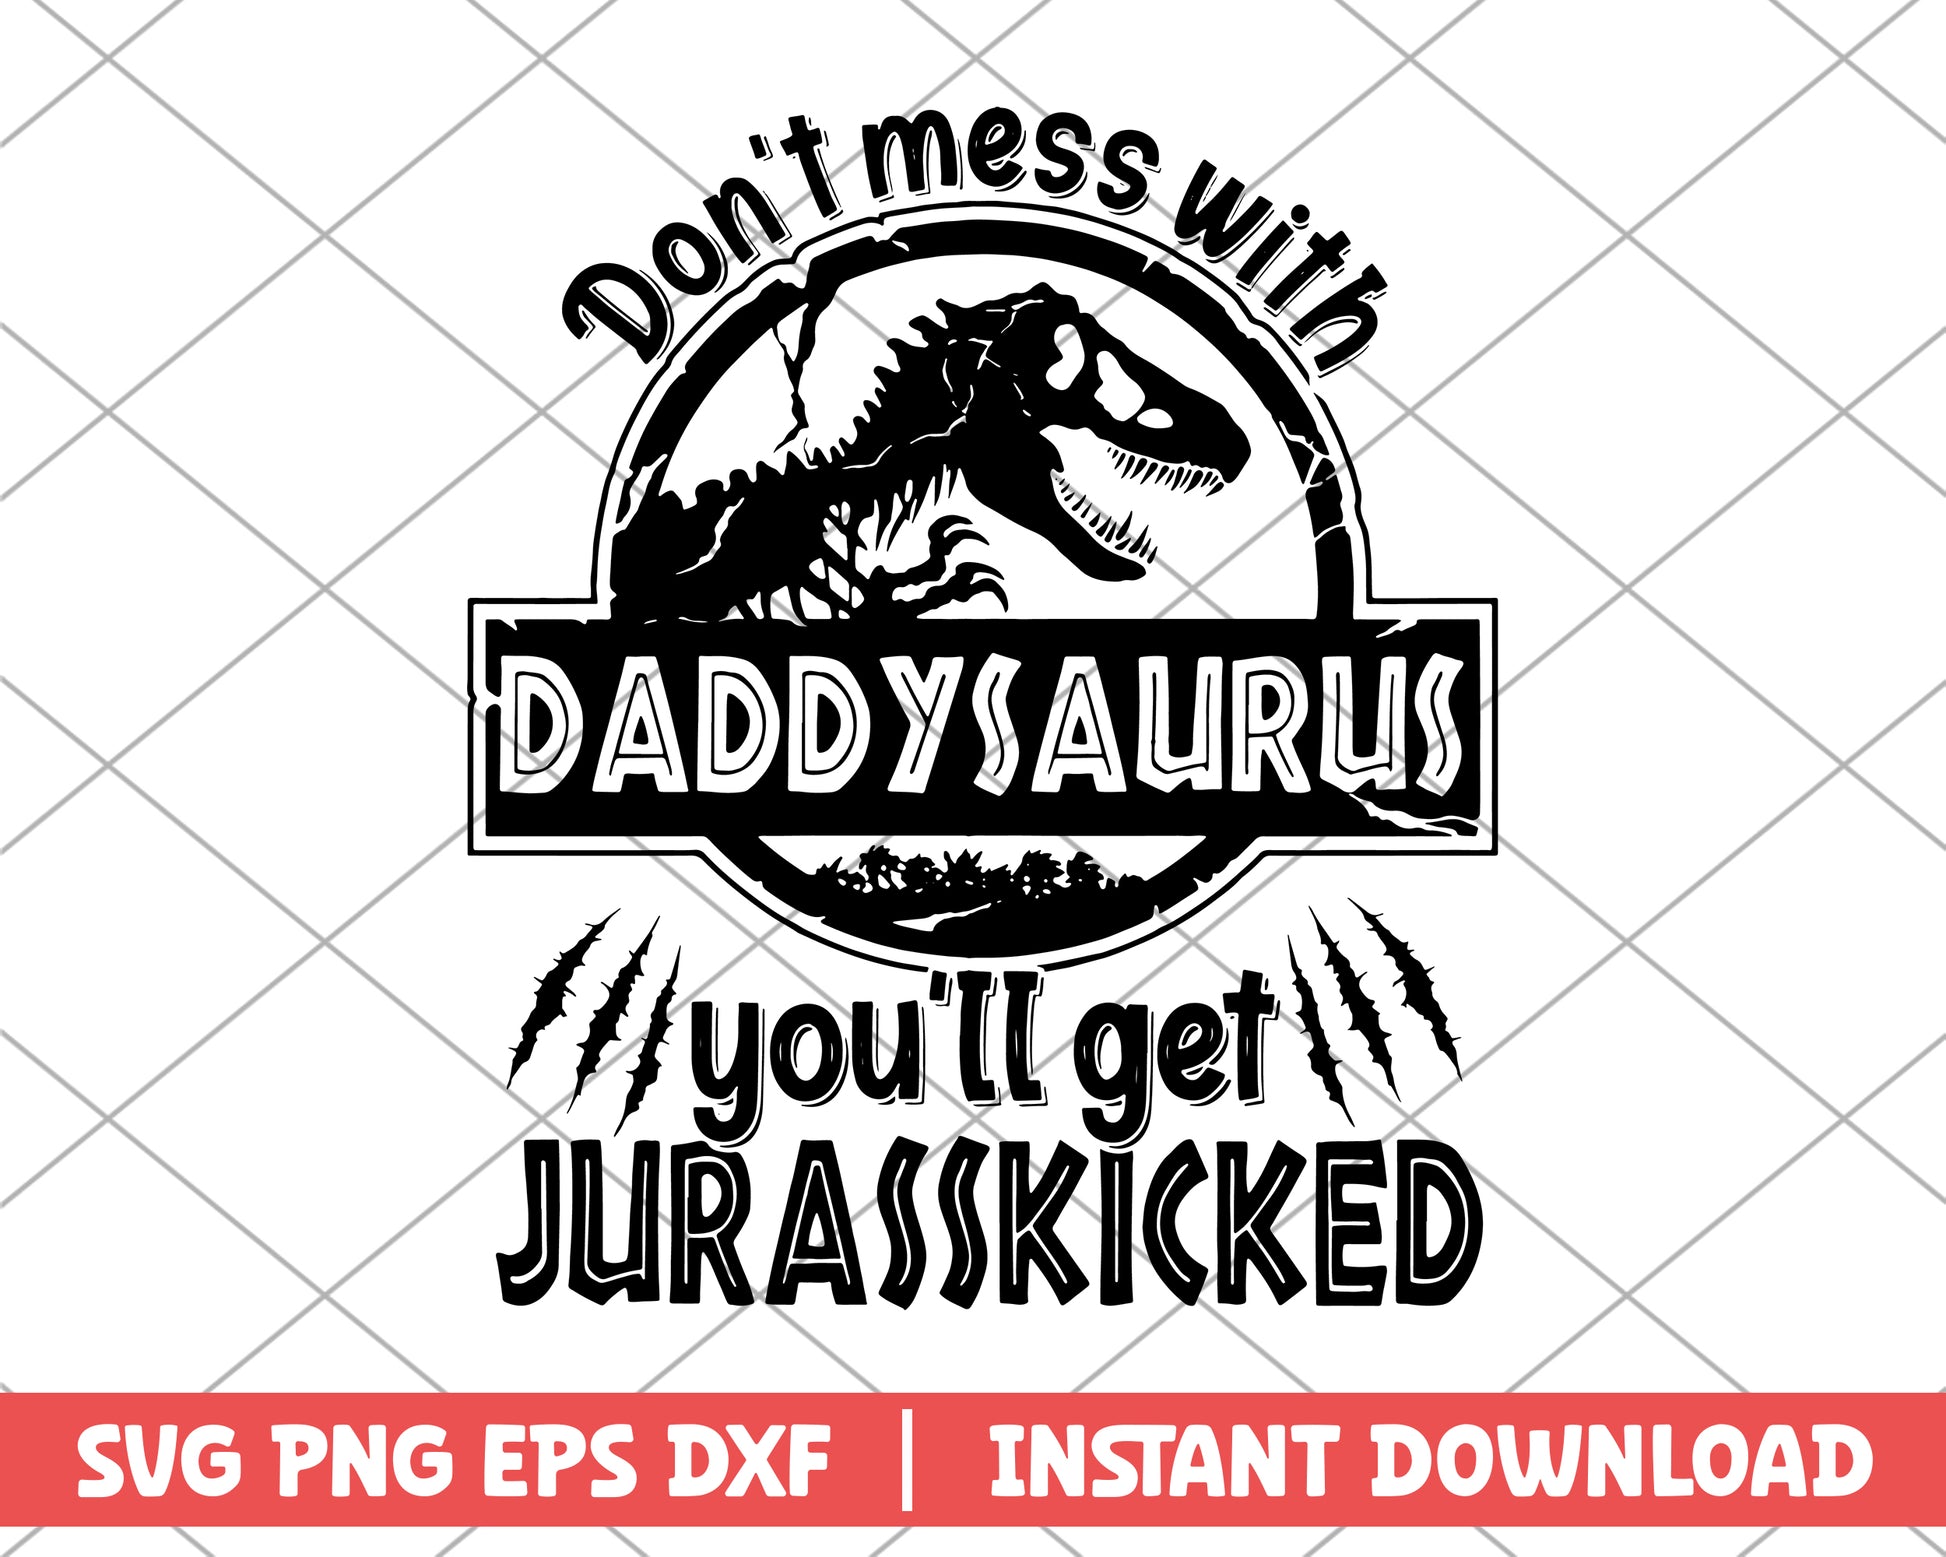 Dont Mess With Daddy saurus svg